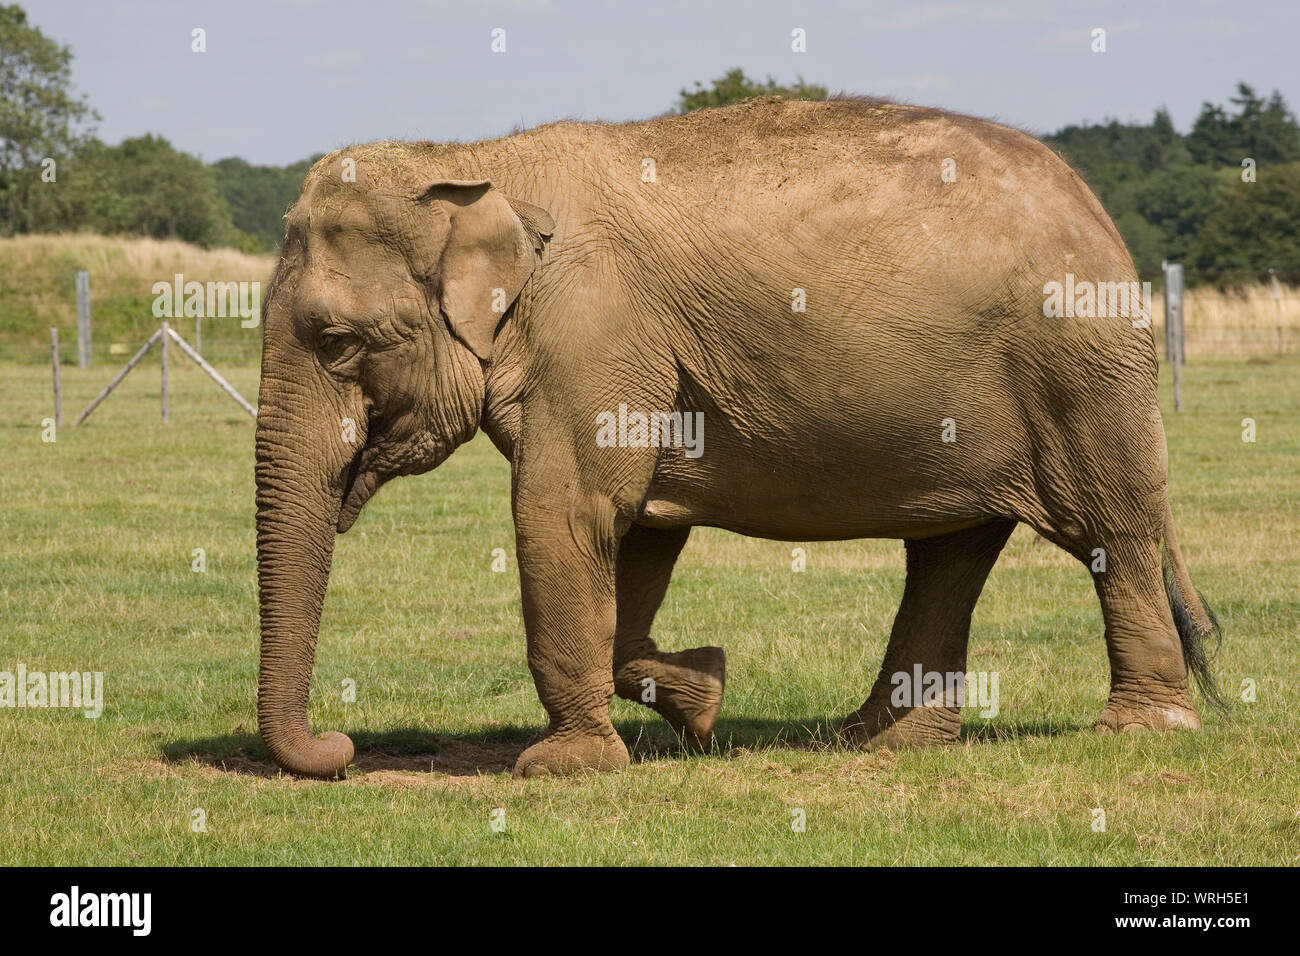 Mature female Asian elephant on grass in enclosure at Whipsnade zoo Stock Photo